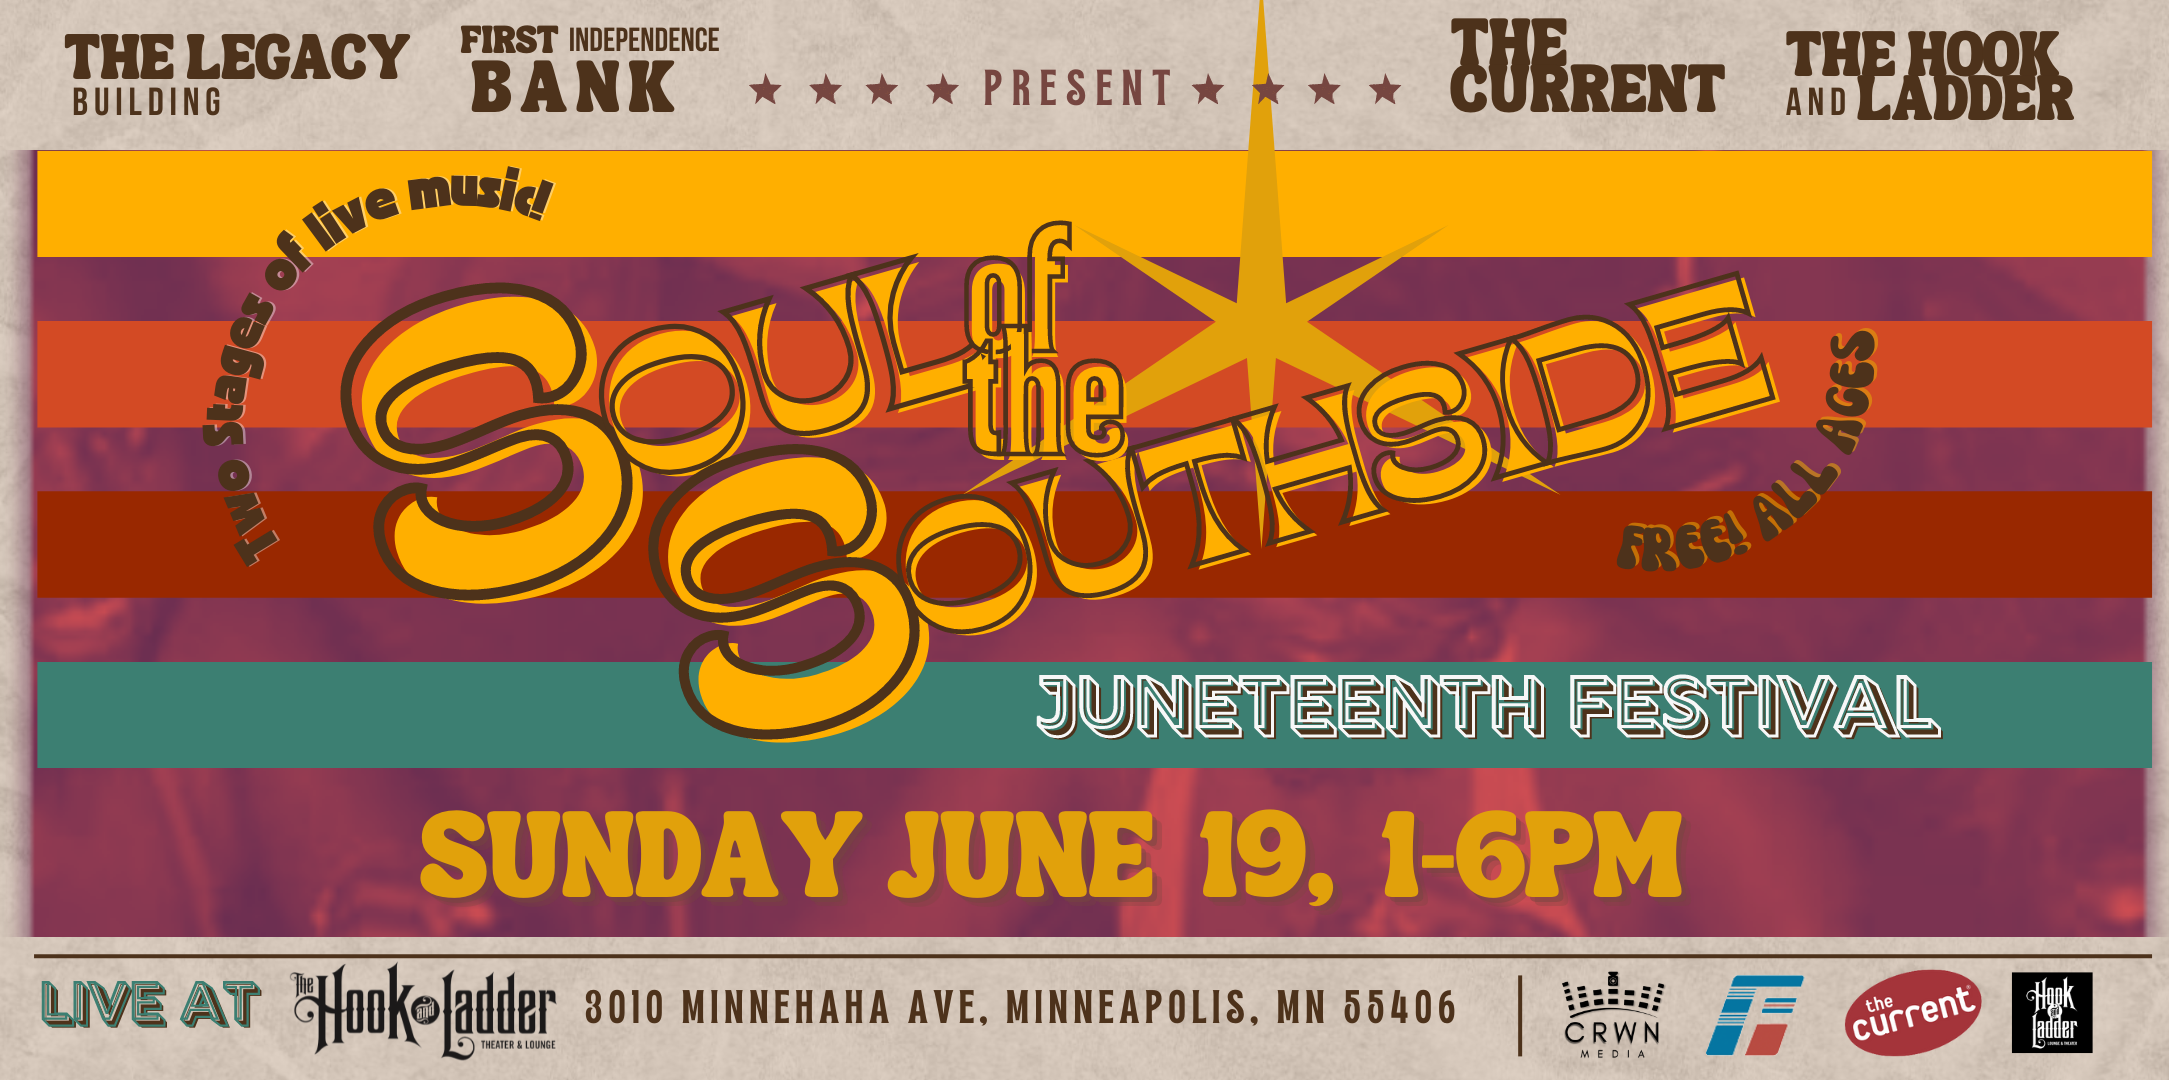 The Legacy Building, First Independence Bank, The Current, & The Firehouse PAC presents Soul of the Southside Juneteenth Festival Sunday, June 19 Under The Canopy at The Hook and Ladder Theater 1-6pm :: FREE :: Family Friendly